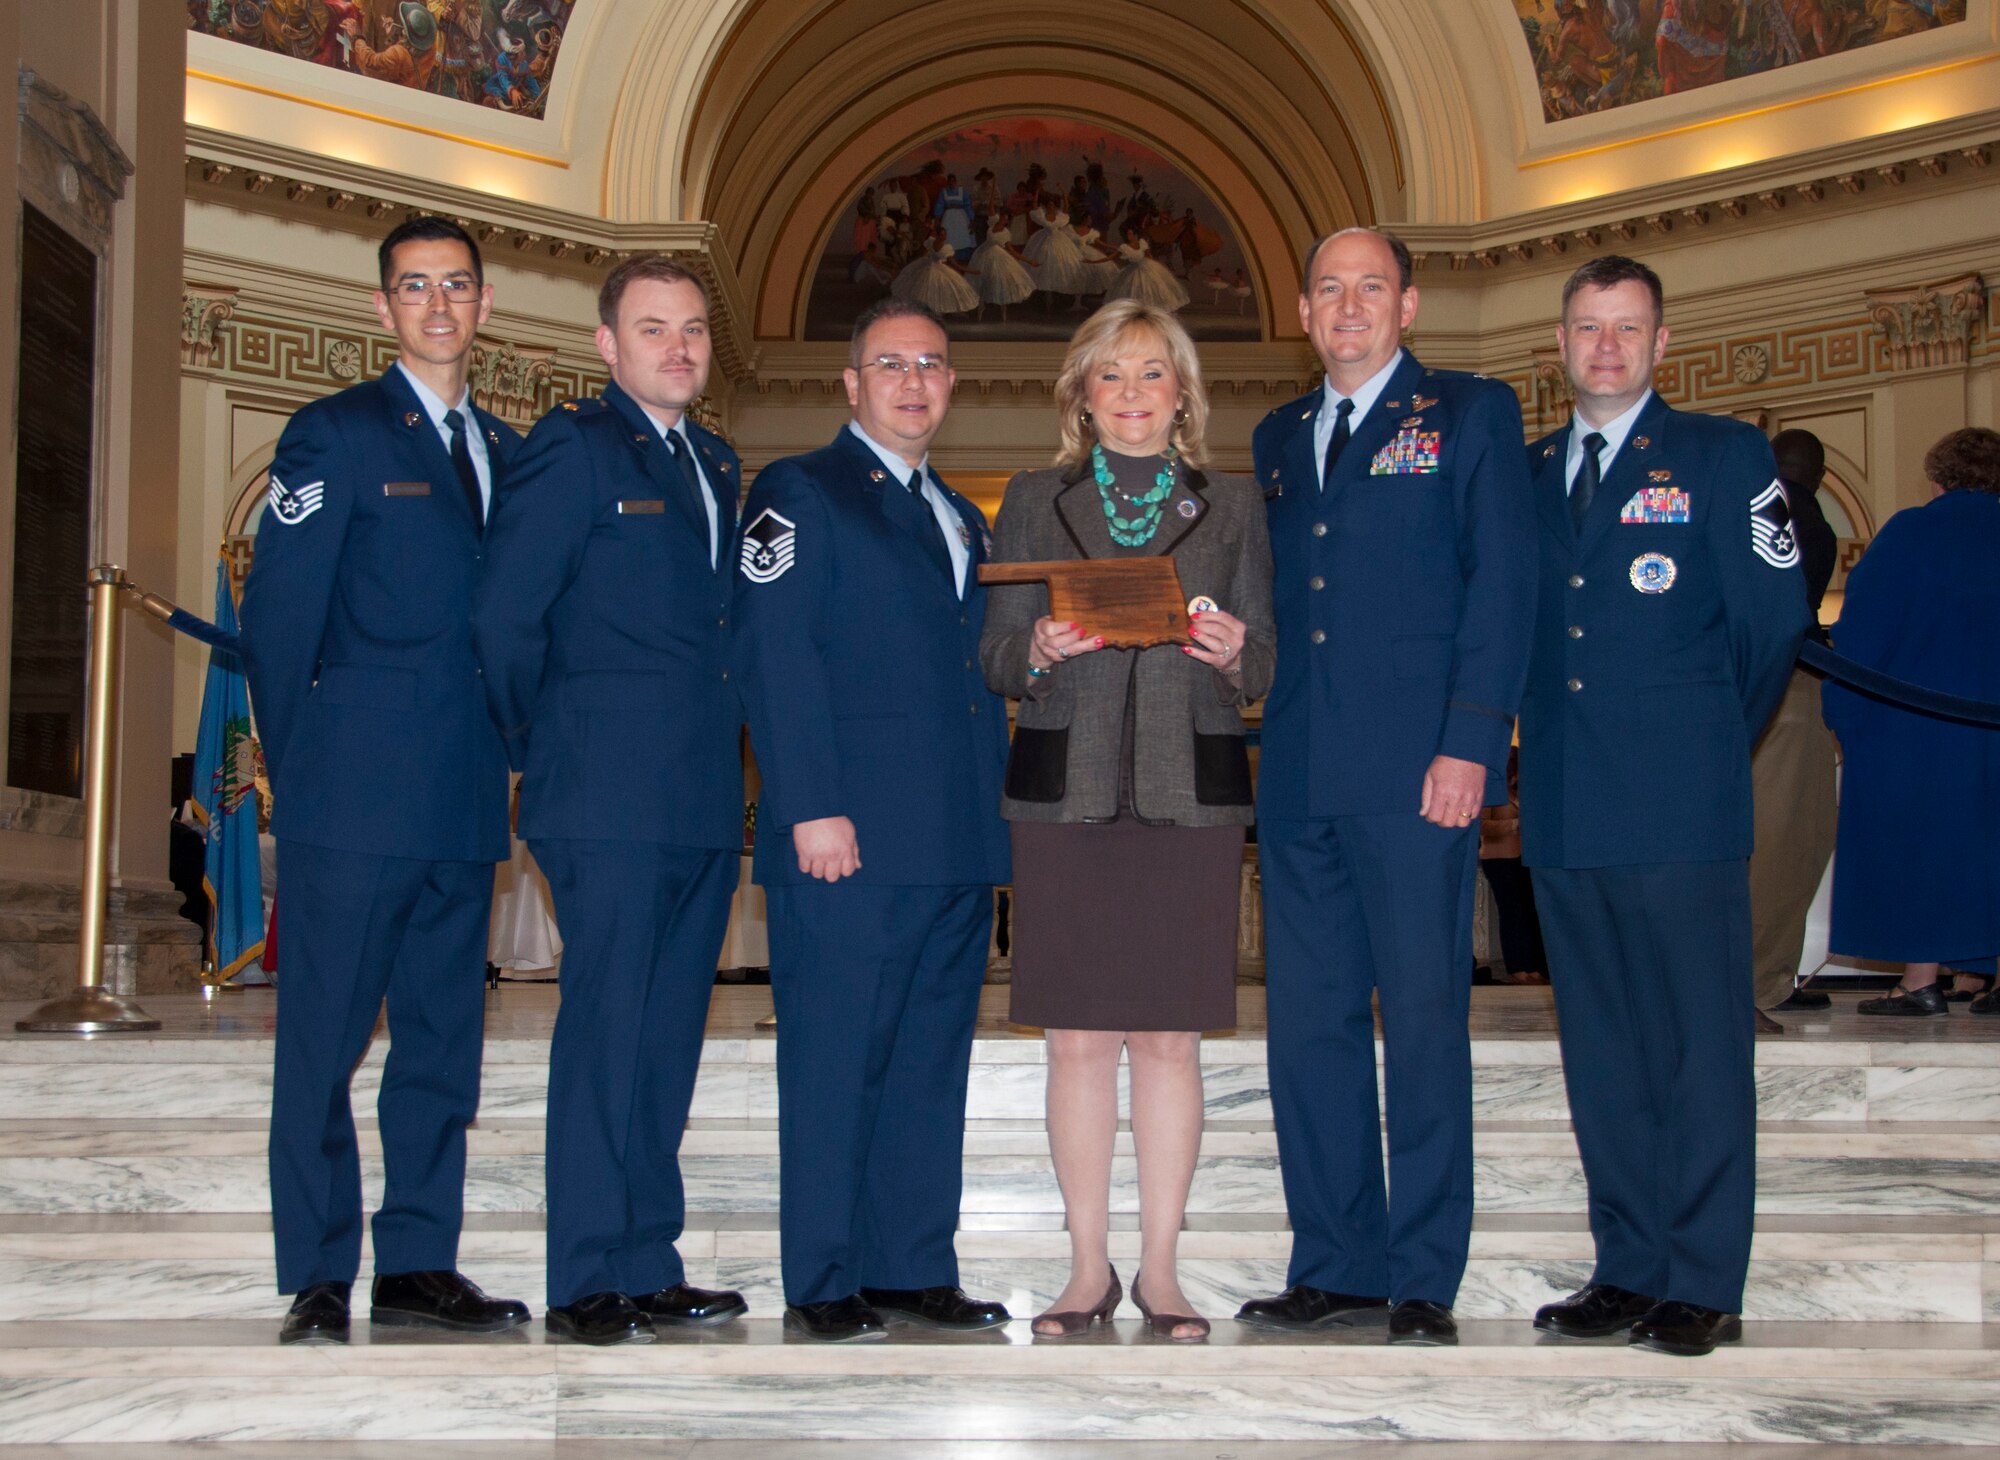 Pictured from left to right: Staff Sgt. Matthew Quackenbush, 507th Air Refueling Wing recruiting, Maj. Jon Quinlan, 507th ARW public affairs, Master Sgt. Stewart Frazier, 507th ARW recruiting, Oklahoma Gov. Mary Fallin, Col. Thomas Smith, 507th Operations Group commander and Senior Master Sgt. Kenneth Toon, 507th ARW recruiting flight chief.   The members of the 507th ARW presented the governor a plaque and wing coin to thank her for her support to Air Force Reserve recruiting efforts in the greater Oklahoma area.  (Courtesy Photo)